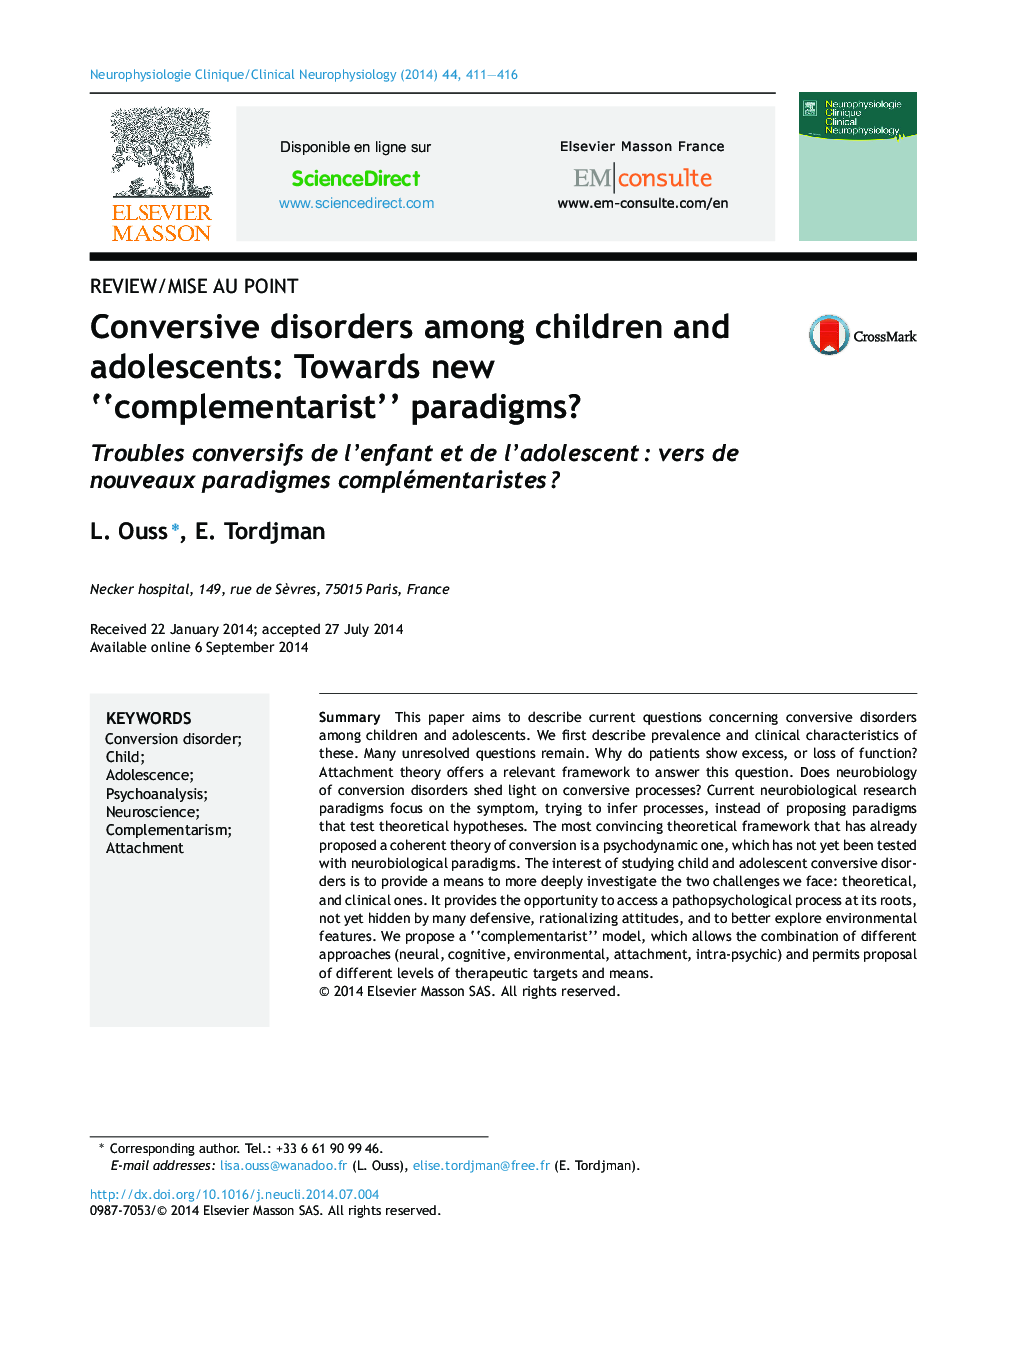 Conversive disorders among children and adolescents: Towards new “complementarist” paradigms?